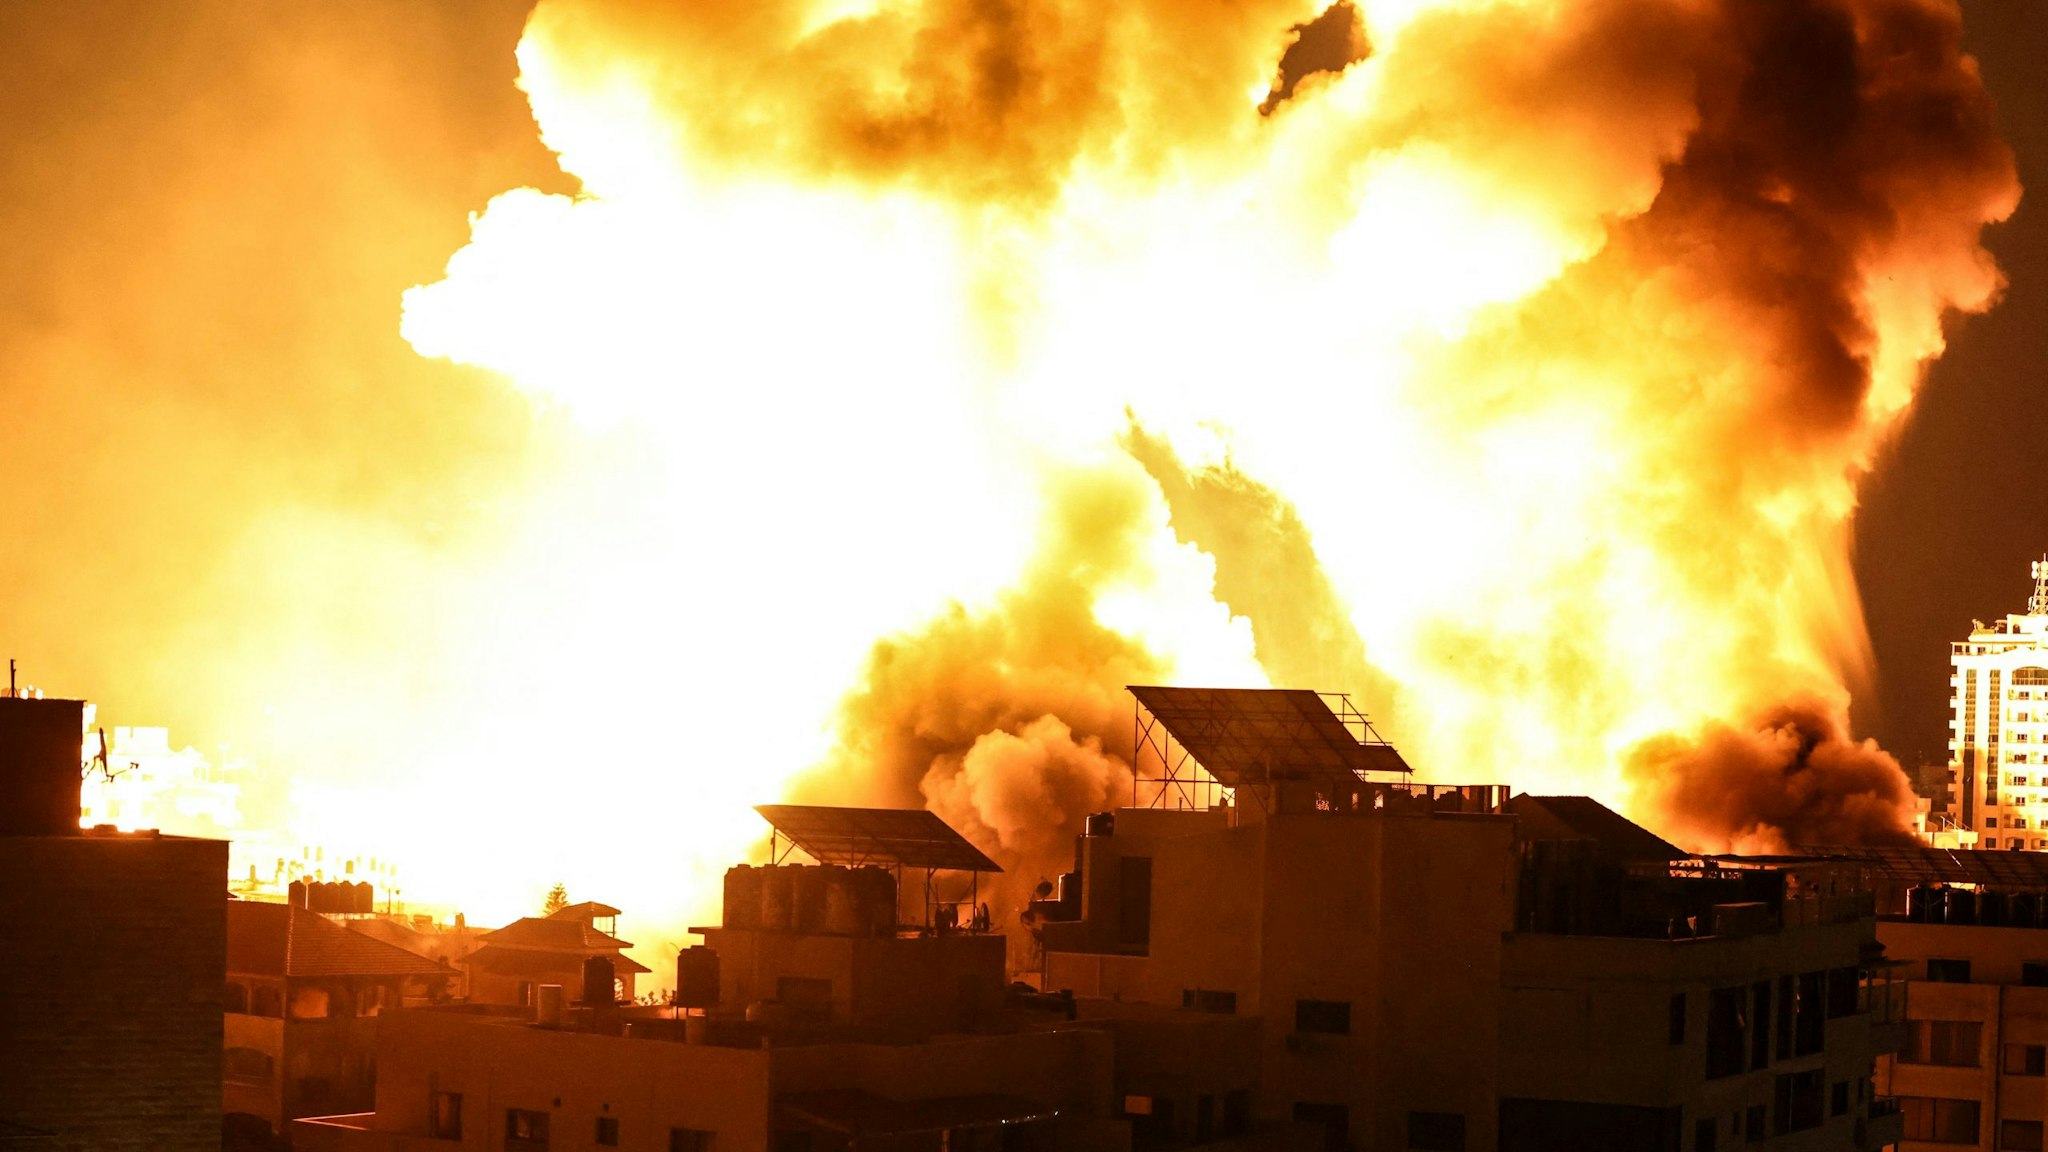 A ball of fire explodes above buildings in Gaza City as Israeli forces shell the Palestinian enclave, early on May 18, 2021. - Israeli jets kept up a barrage of air strikes against the Palestinian enclave of Gaza as a week of violence that has killed more than 200 people pushed world leaders to step up mediation.